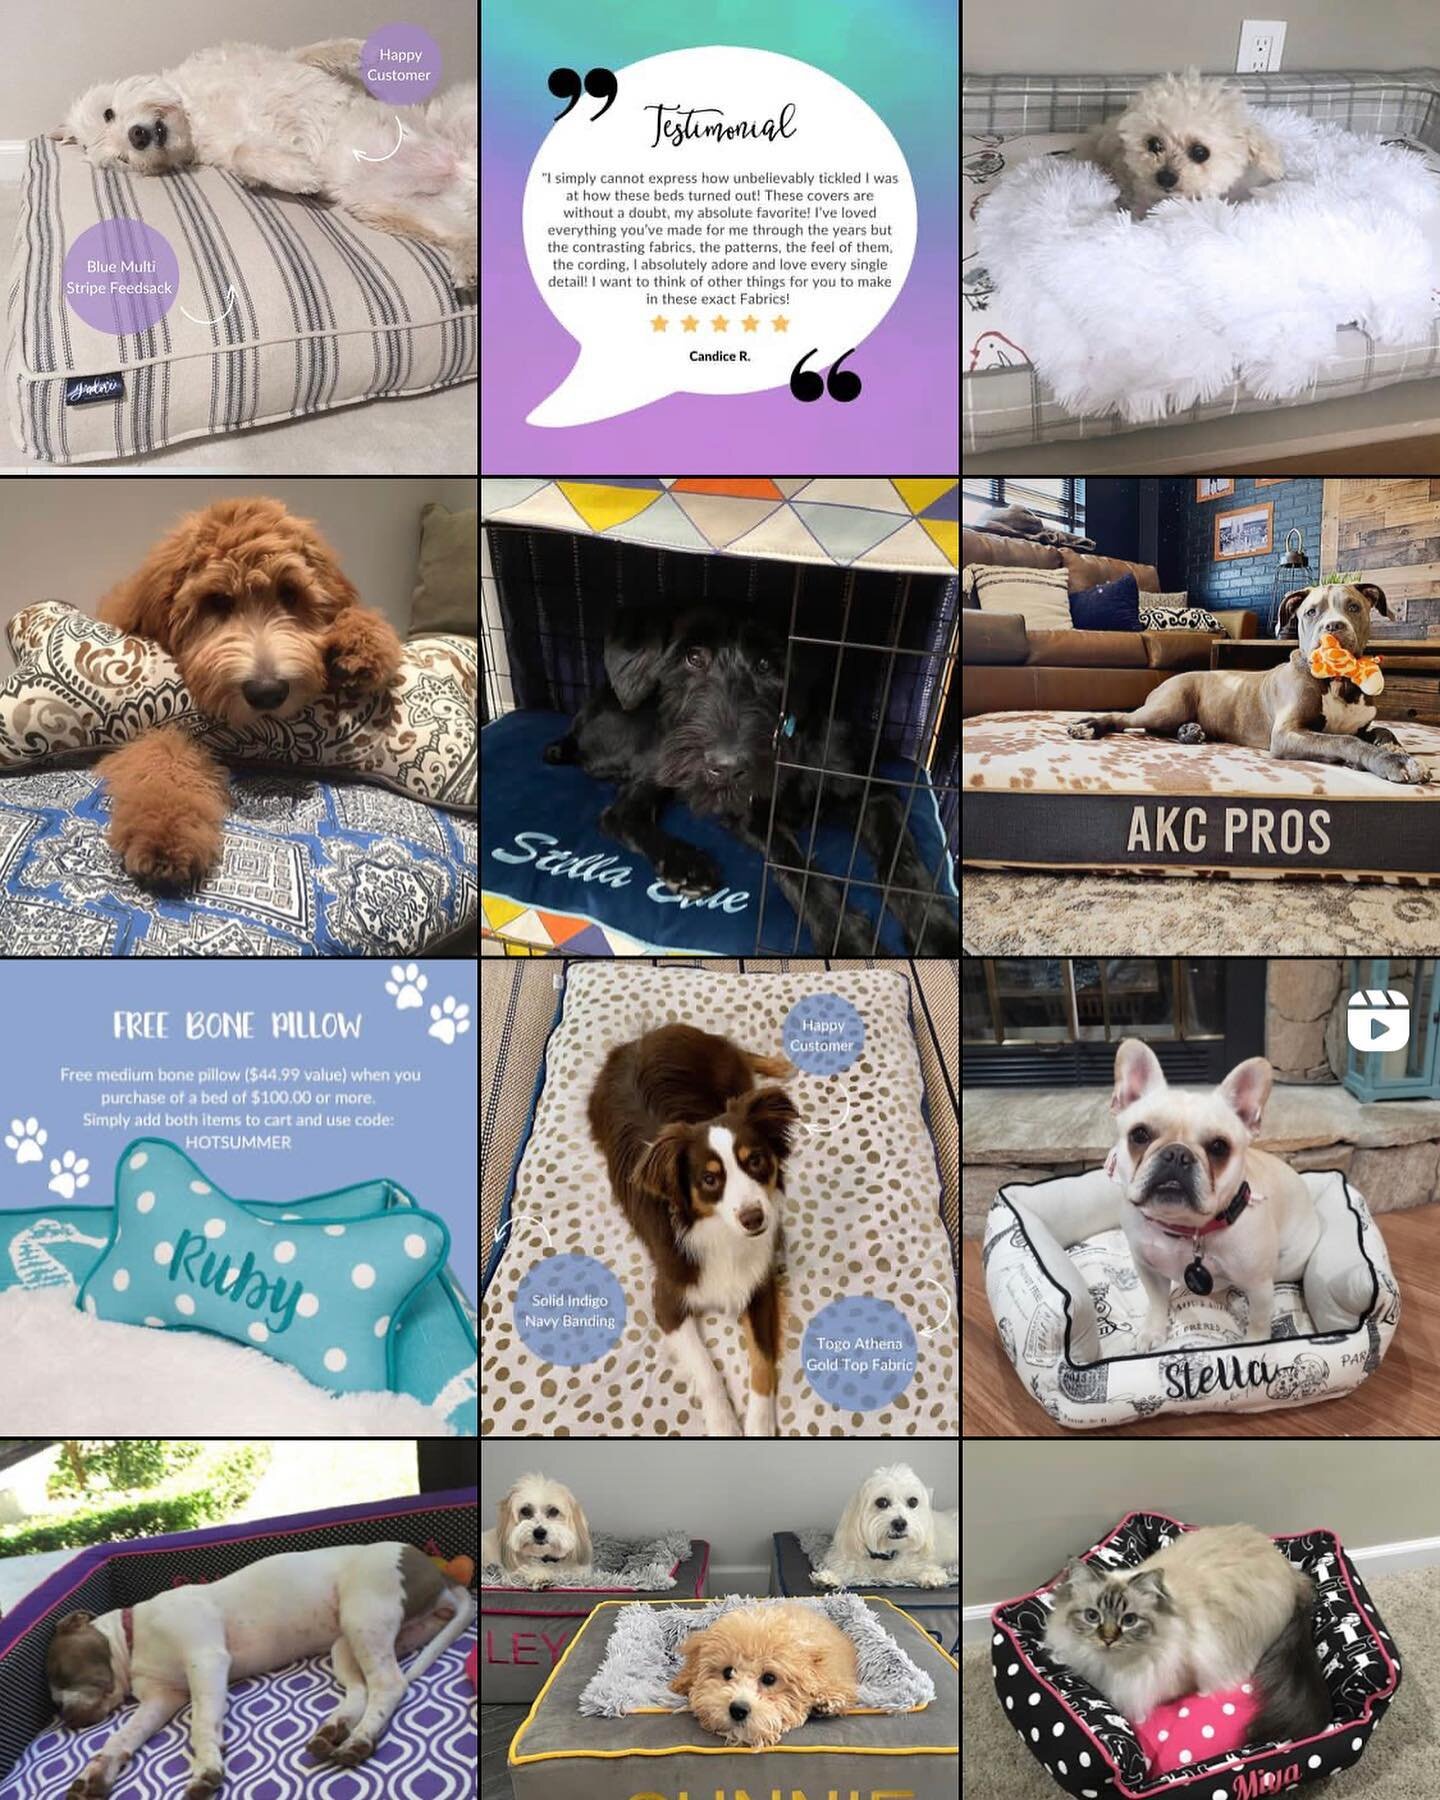 We&rsquo;re loving the feed we curated for our client @jadorepetbeds! They came to us looking for an agency that could build a results driven marketing strategy and build a social media presence that truly reflects the quality of their products! SWIP